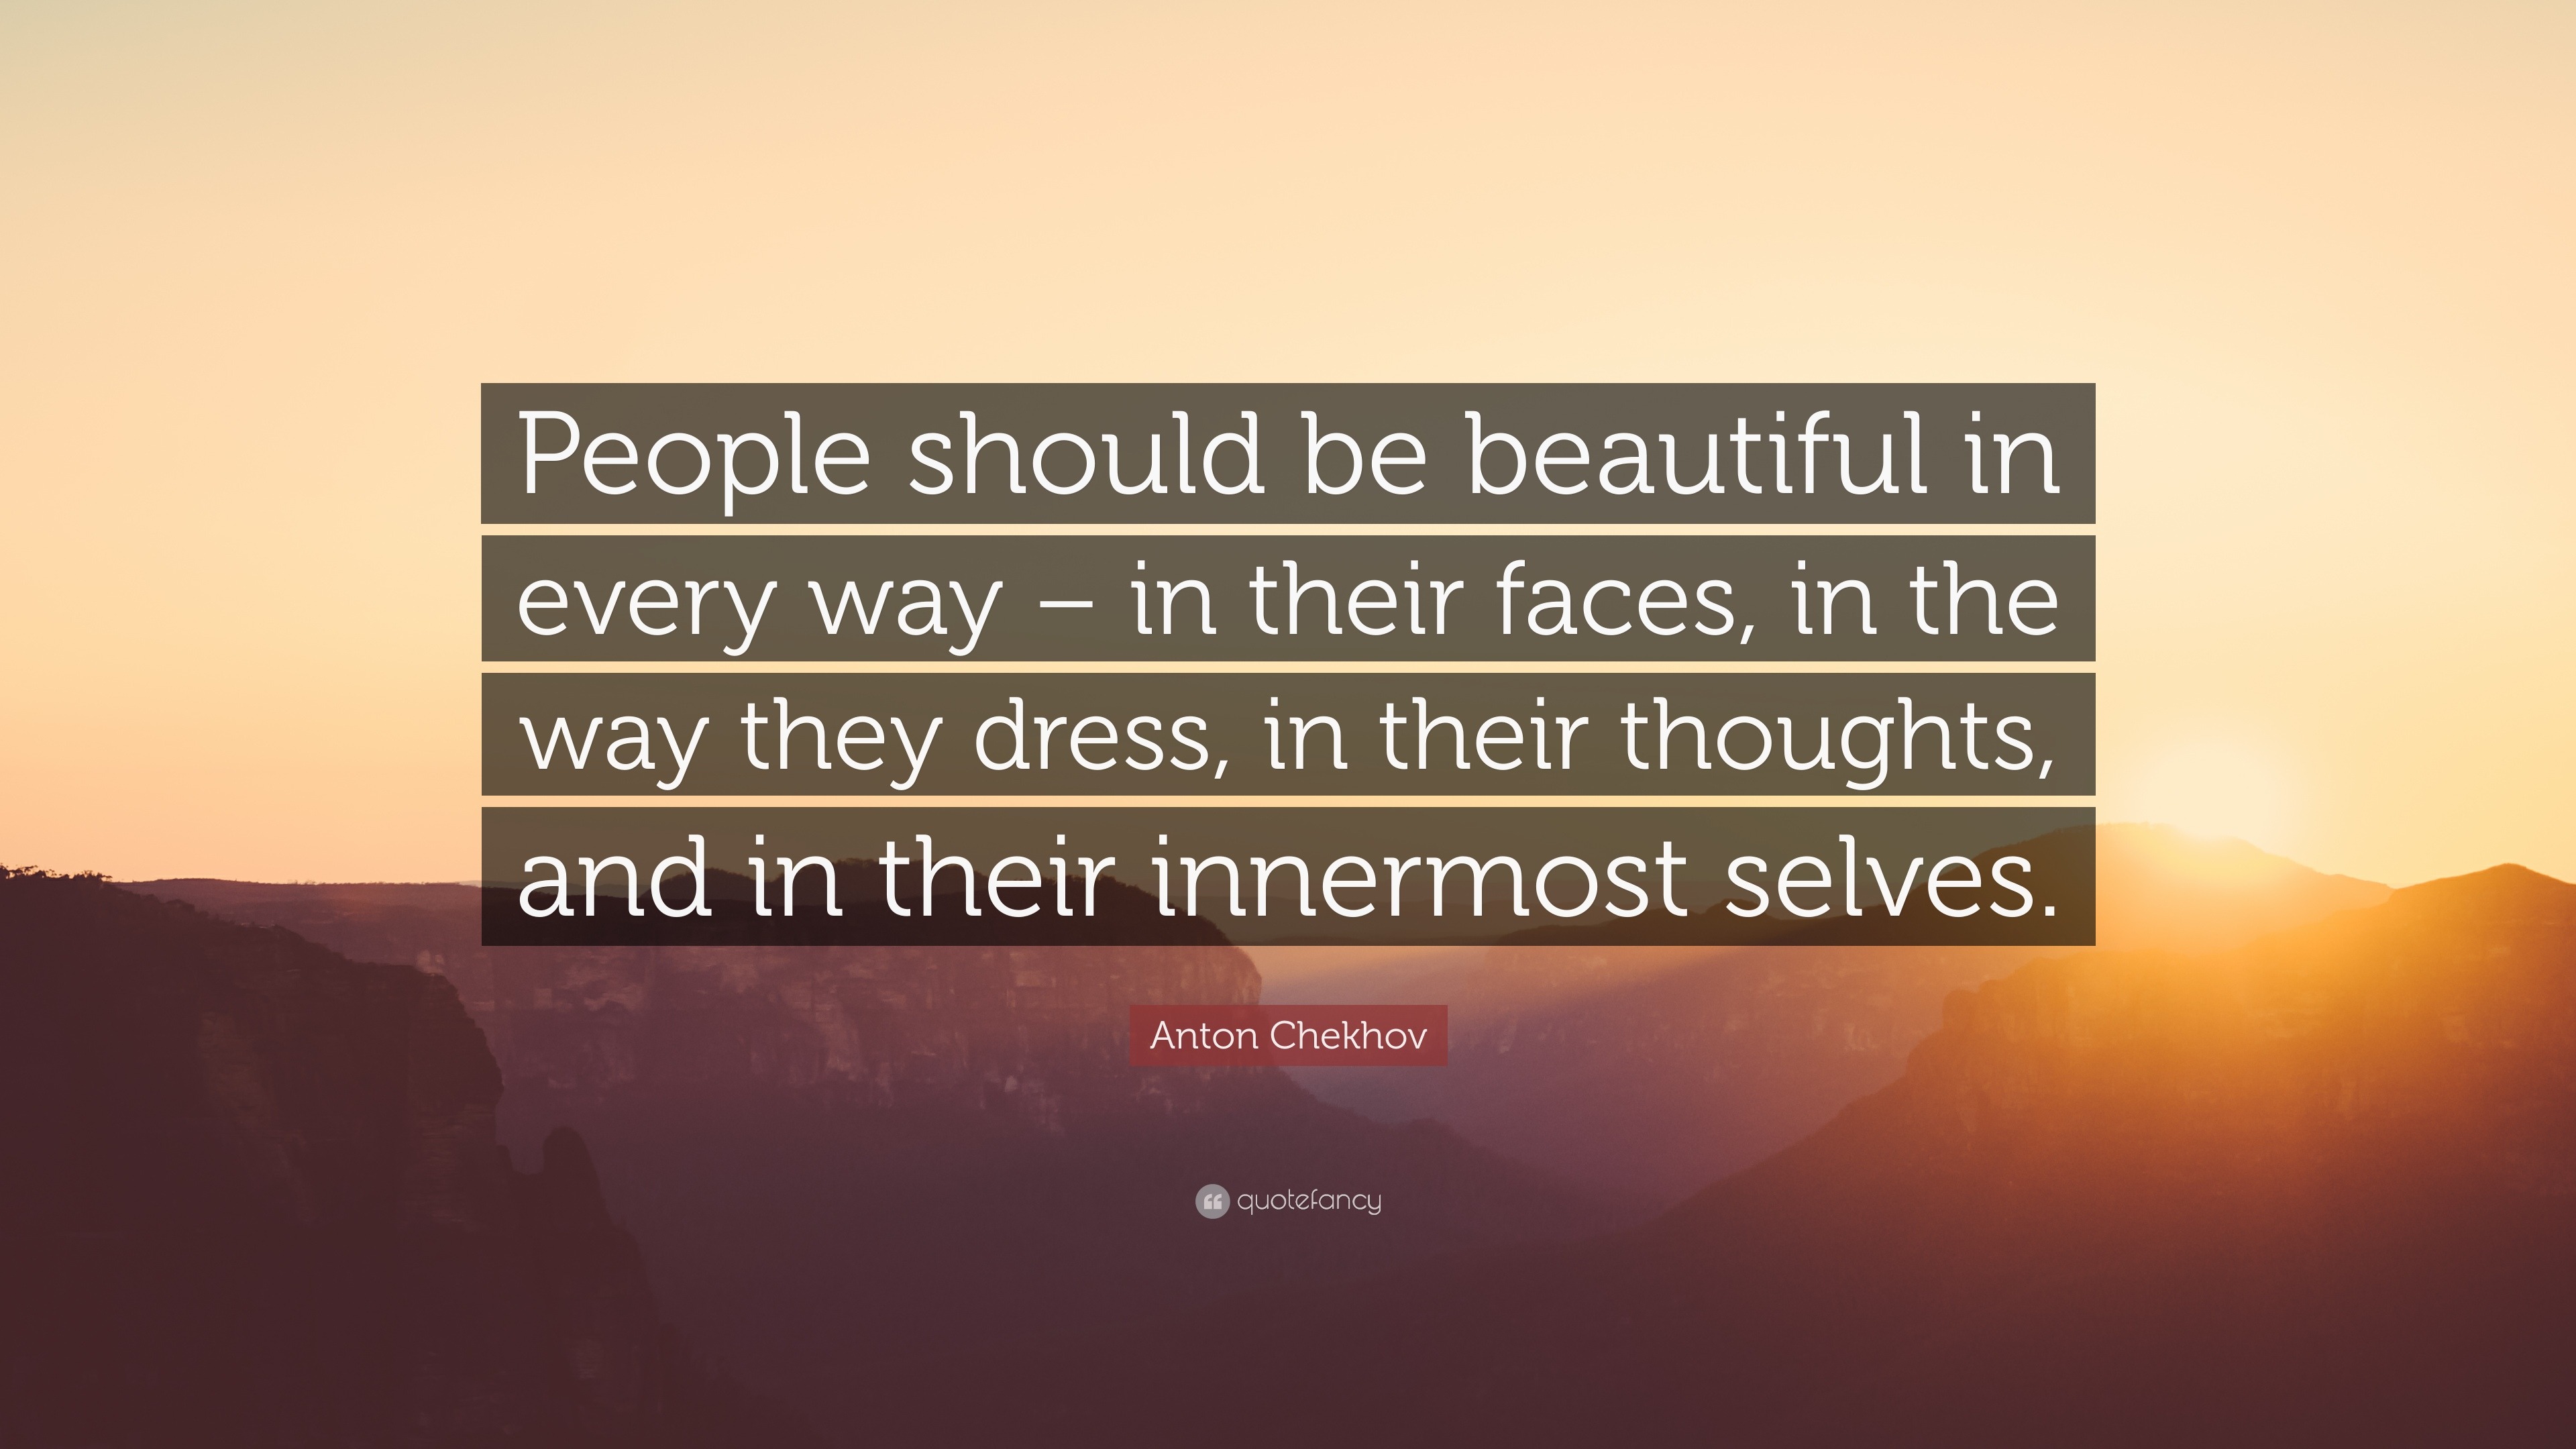 Anton Chekhov Quote: “People should be beautiful in every way – in ...